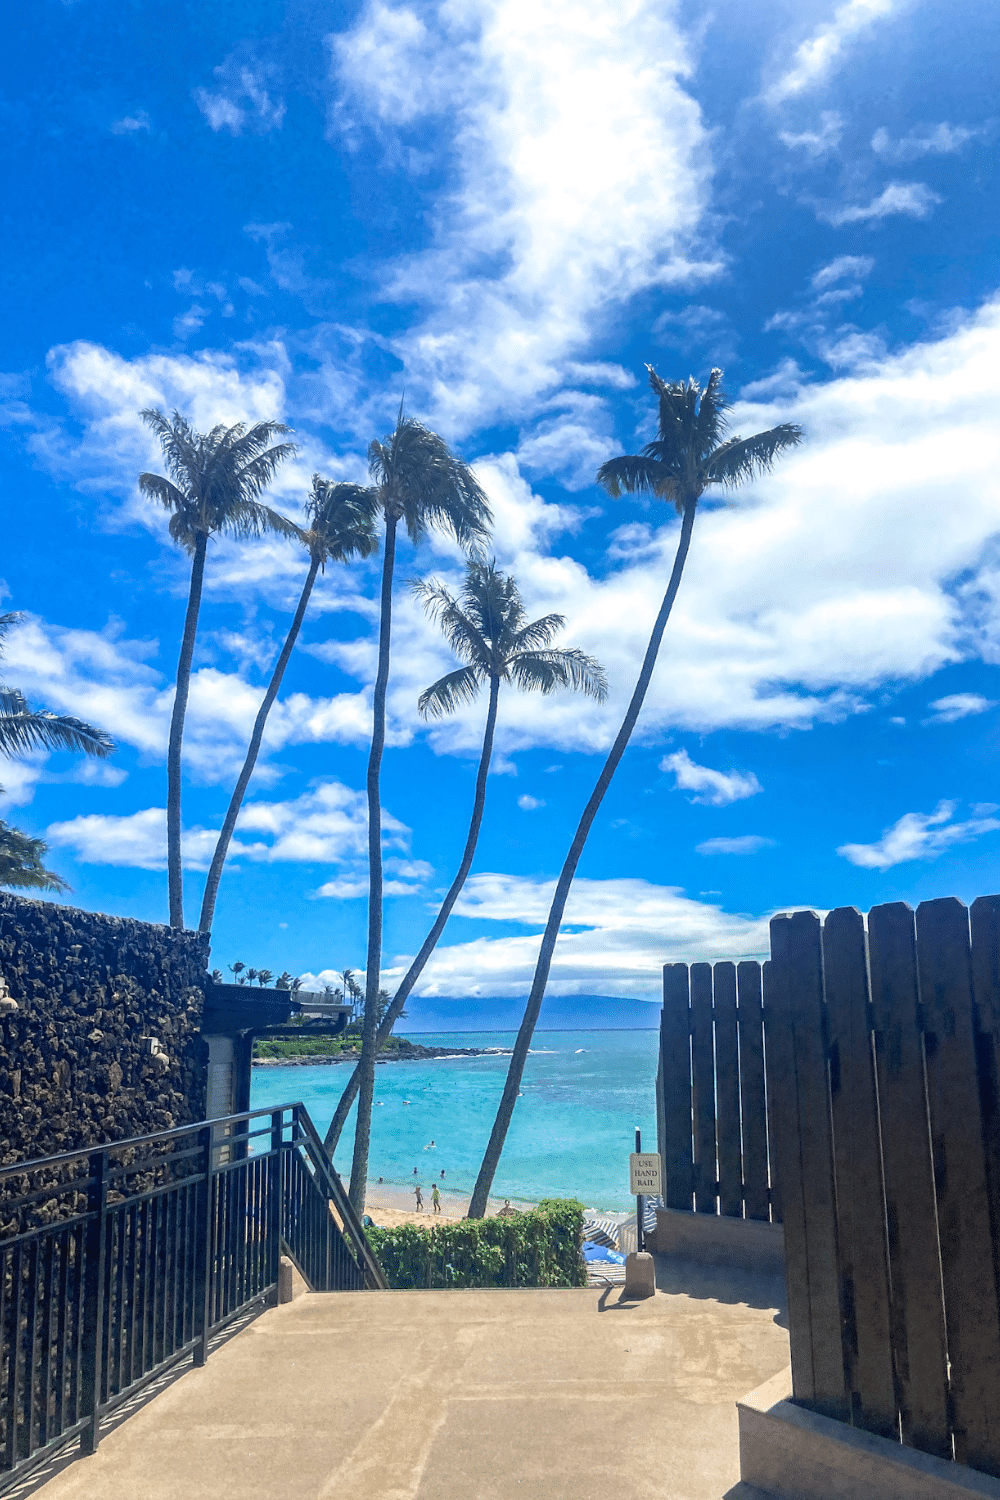 15 Travel Tips For The Perfect Maui Vacation!